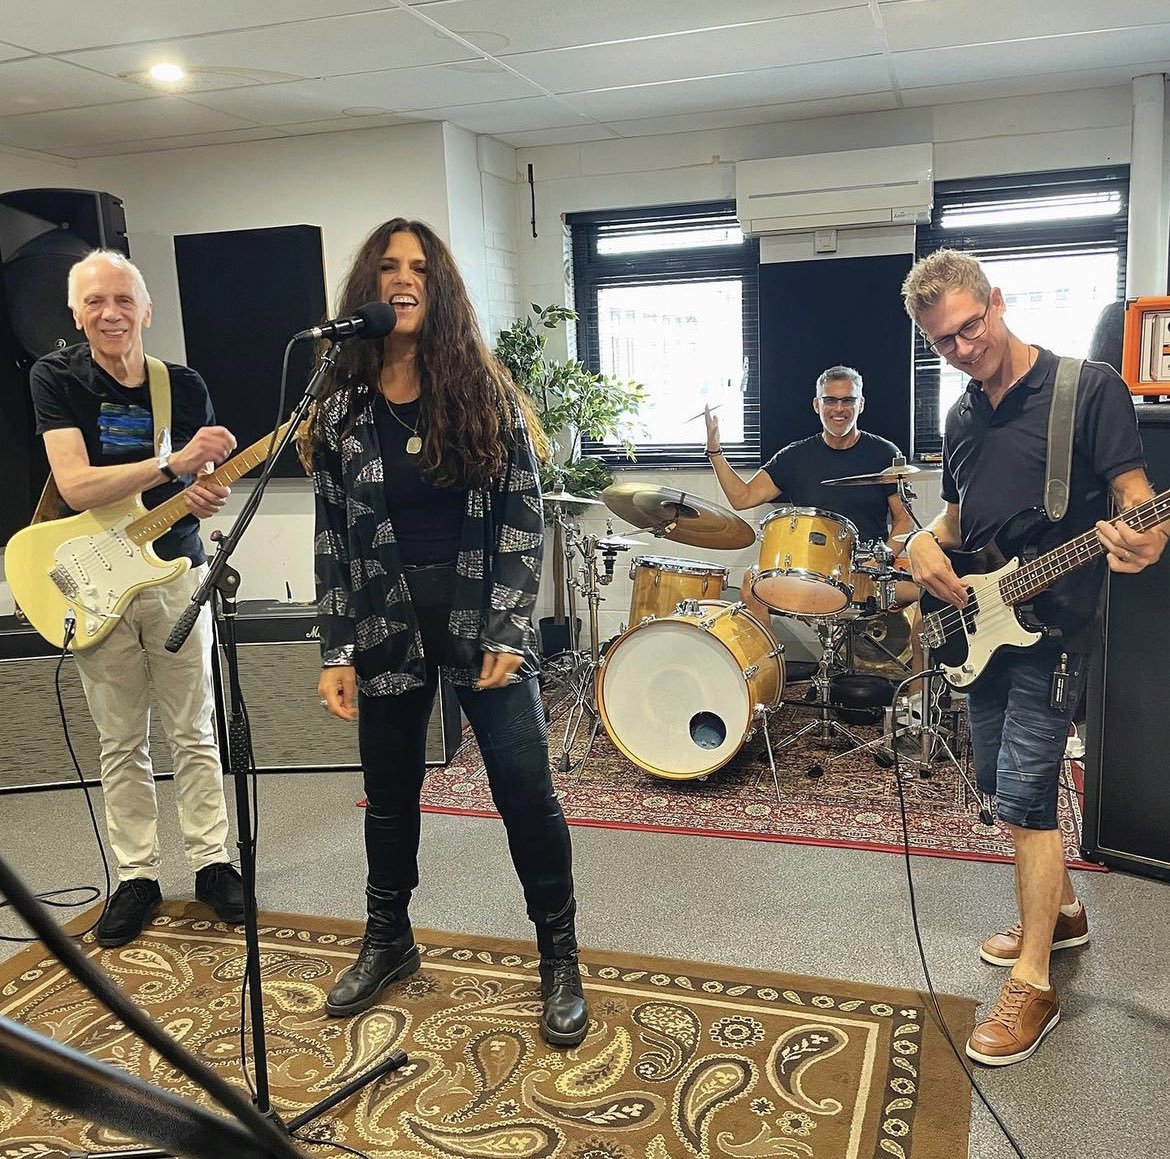 🎶 Jam-Packed Day with the legend @robintrower ! 🎸✨ Had an absolute blast rehearsing for the upcoming video shoot featuring tracks from the new album ‘Joyful Sky.’ 🎥 We’ve got the week to fine-tune every note. We’ll soon be ready to bring these songs to life for your eyes and